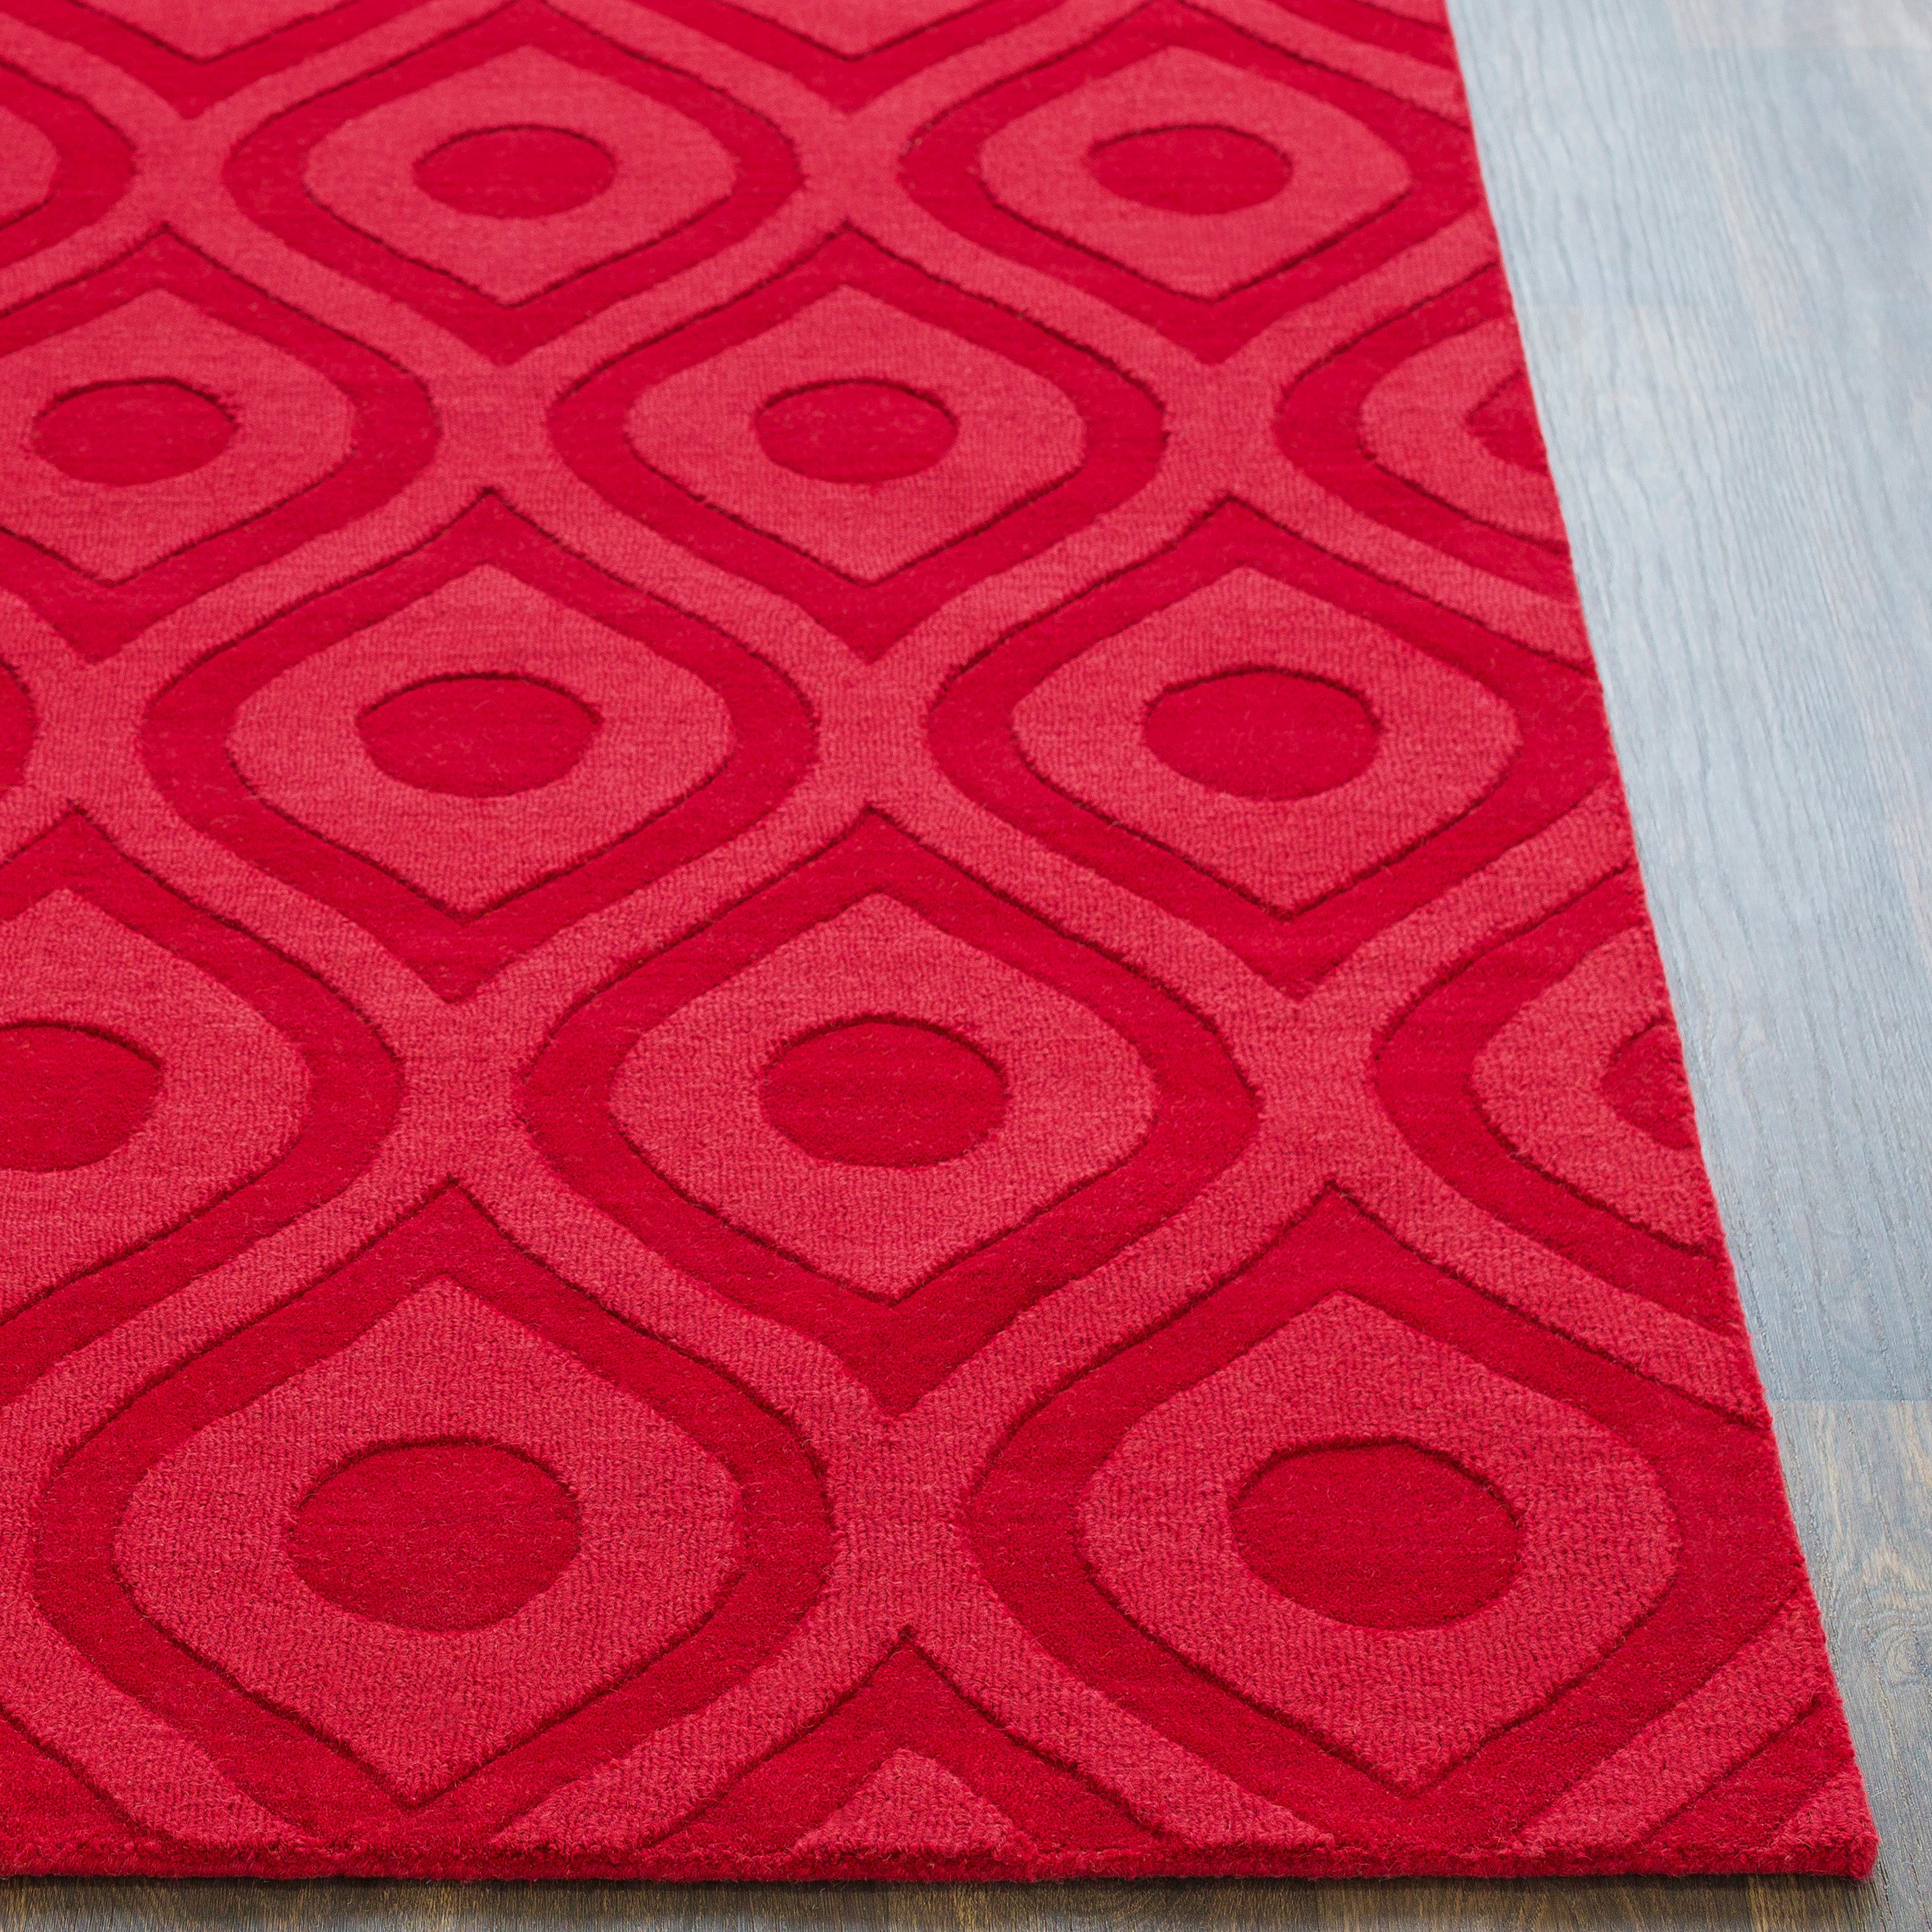 Surya Central Park Solid Red AWHP-4001 Area Rug